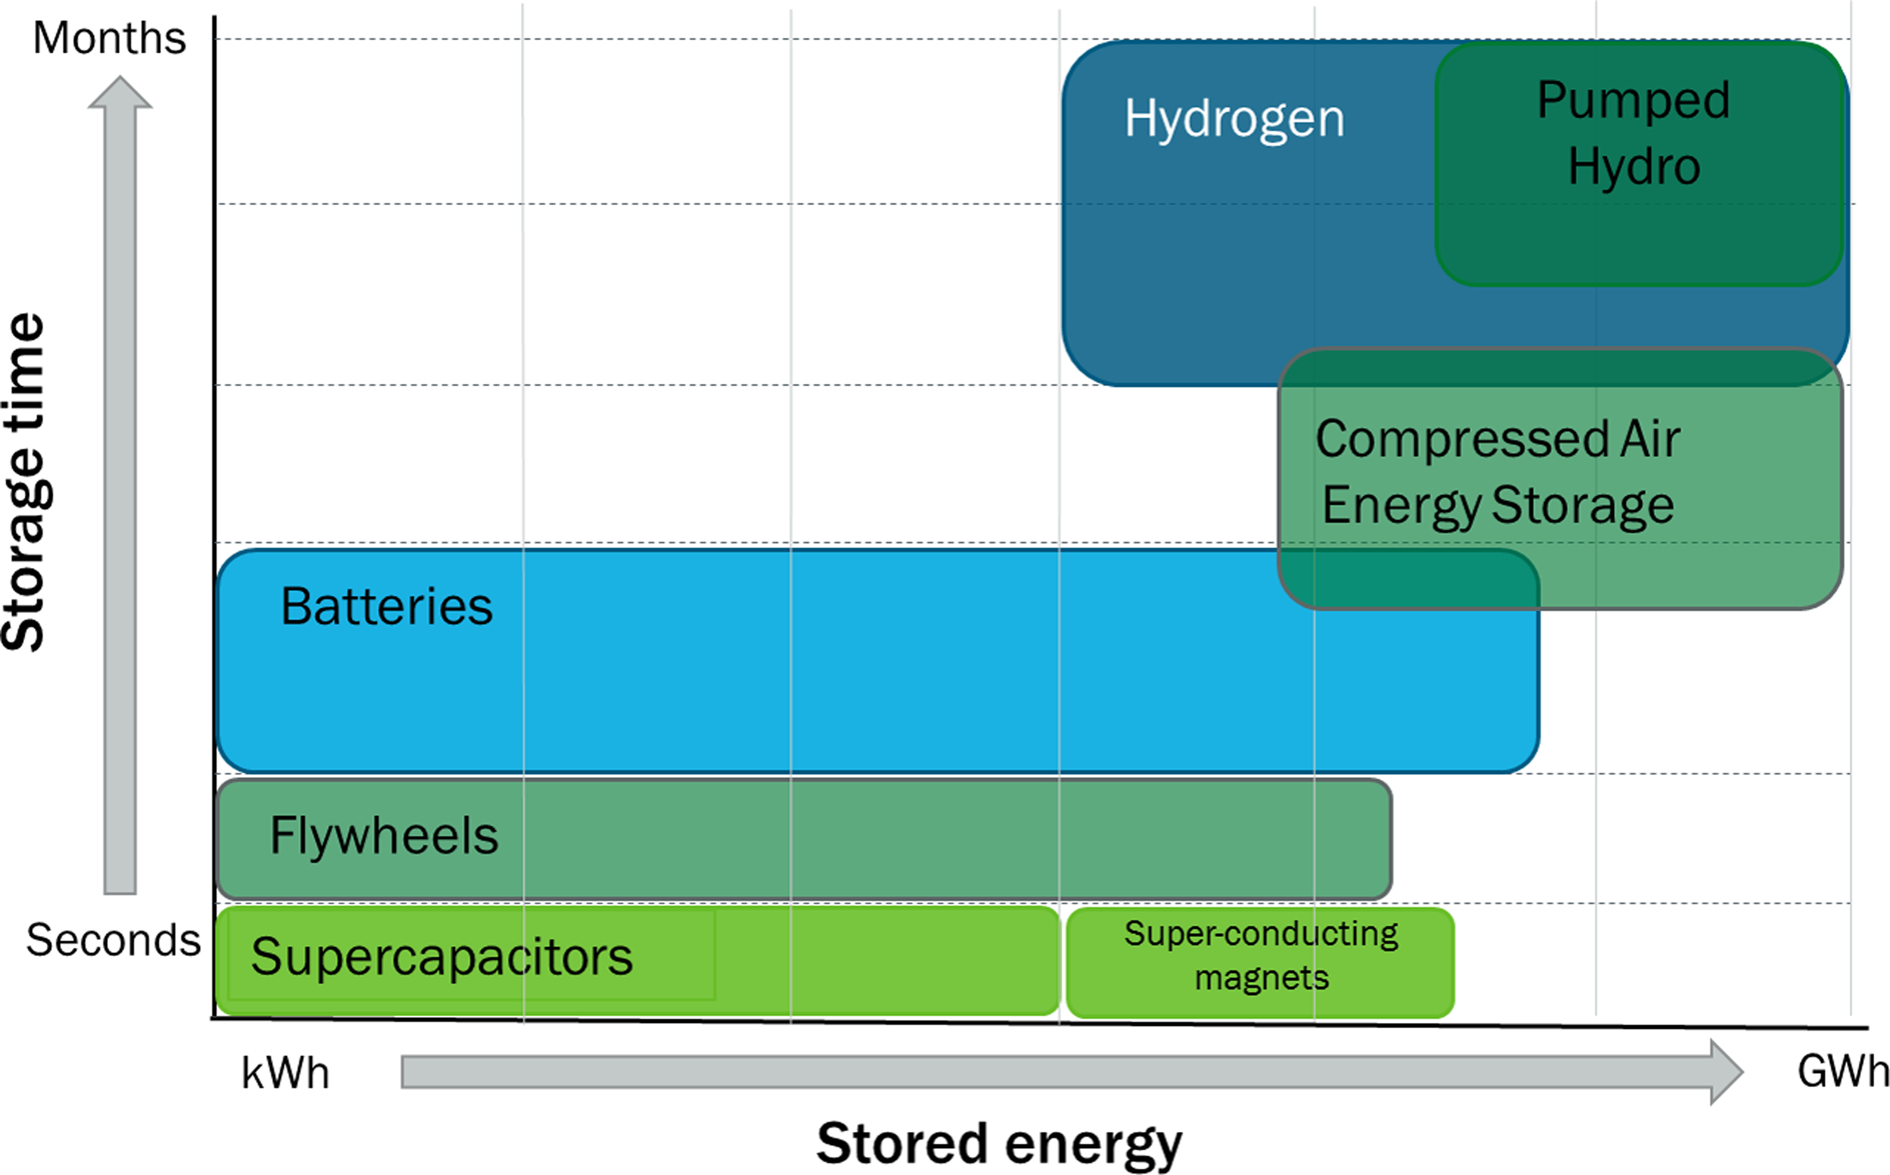 Hydrogen technologies for energy storage: A perspective | MRS Energy